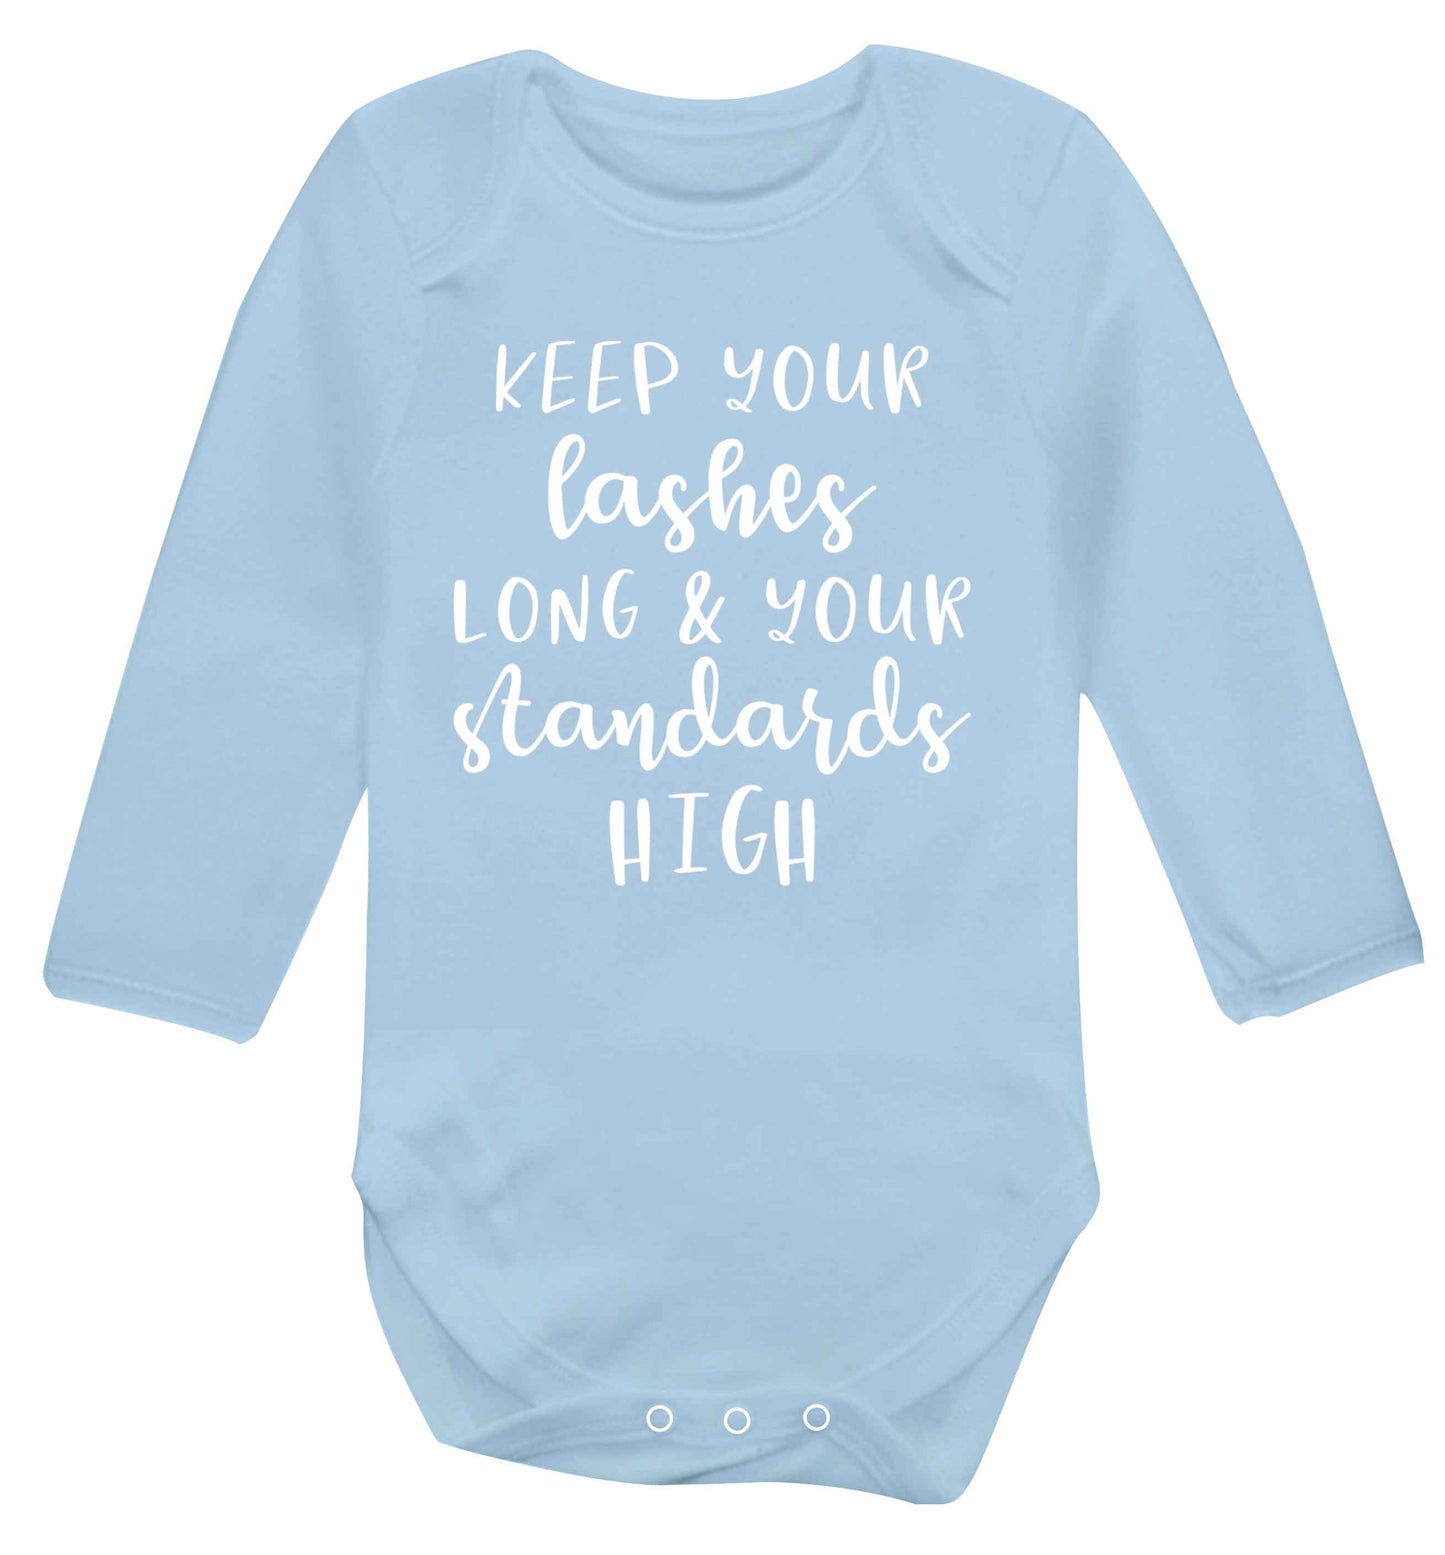 Keep your lashes long and your standards high Baby Vest long sleeved pale blue 6-12 months